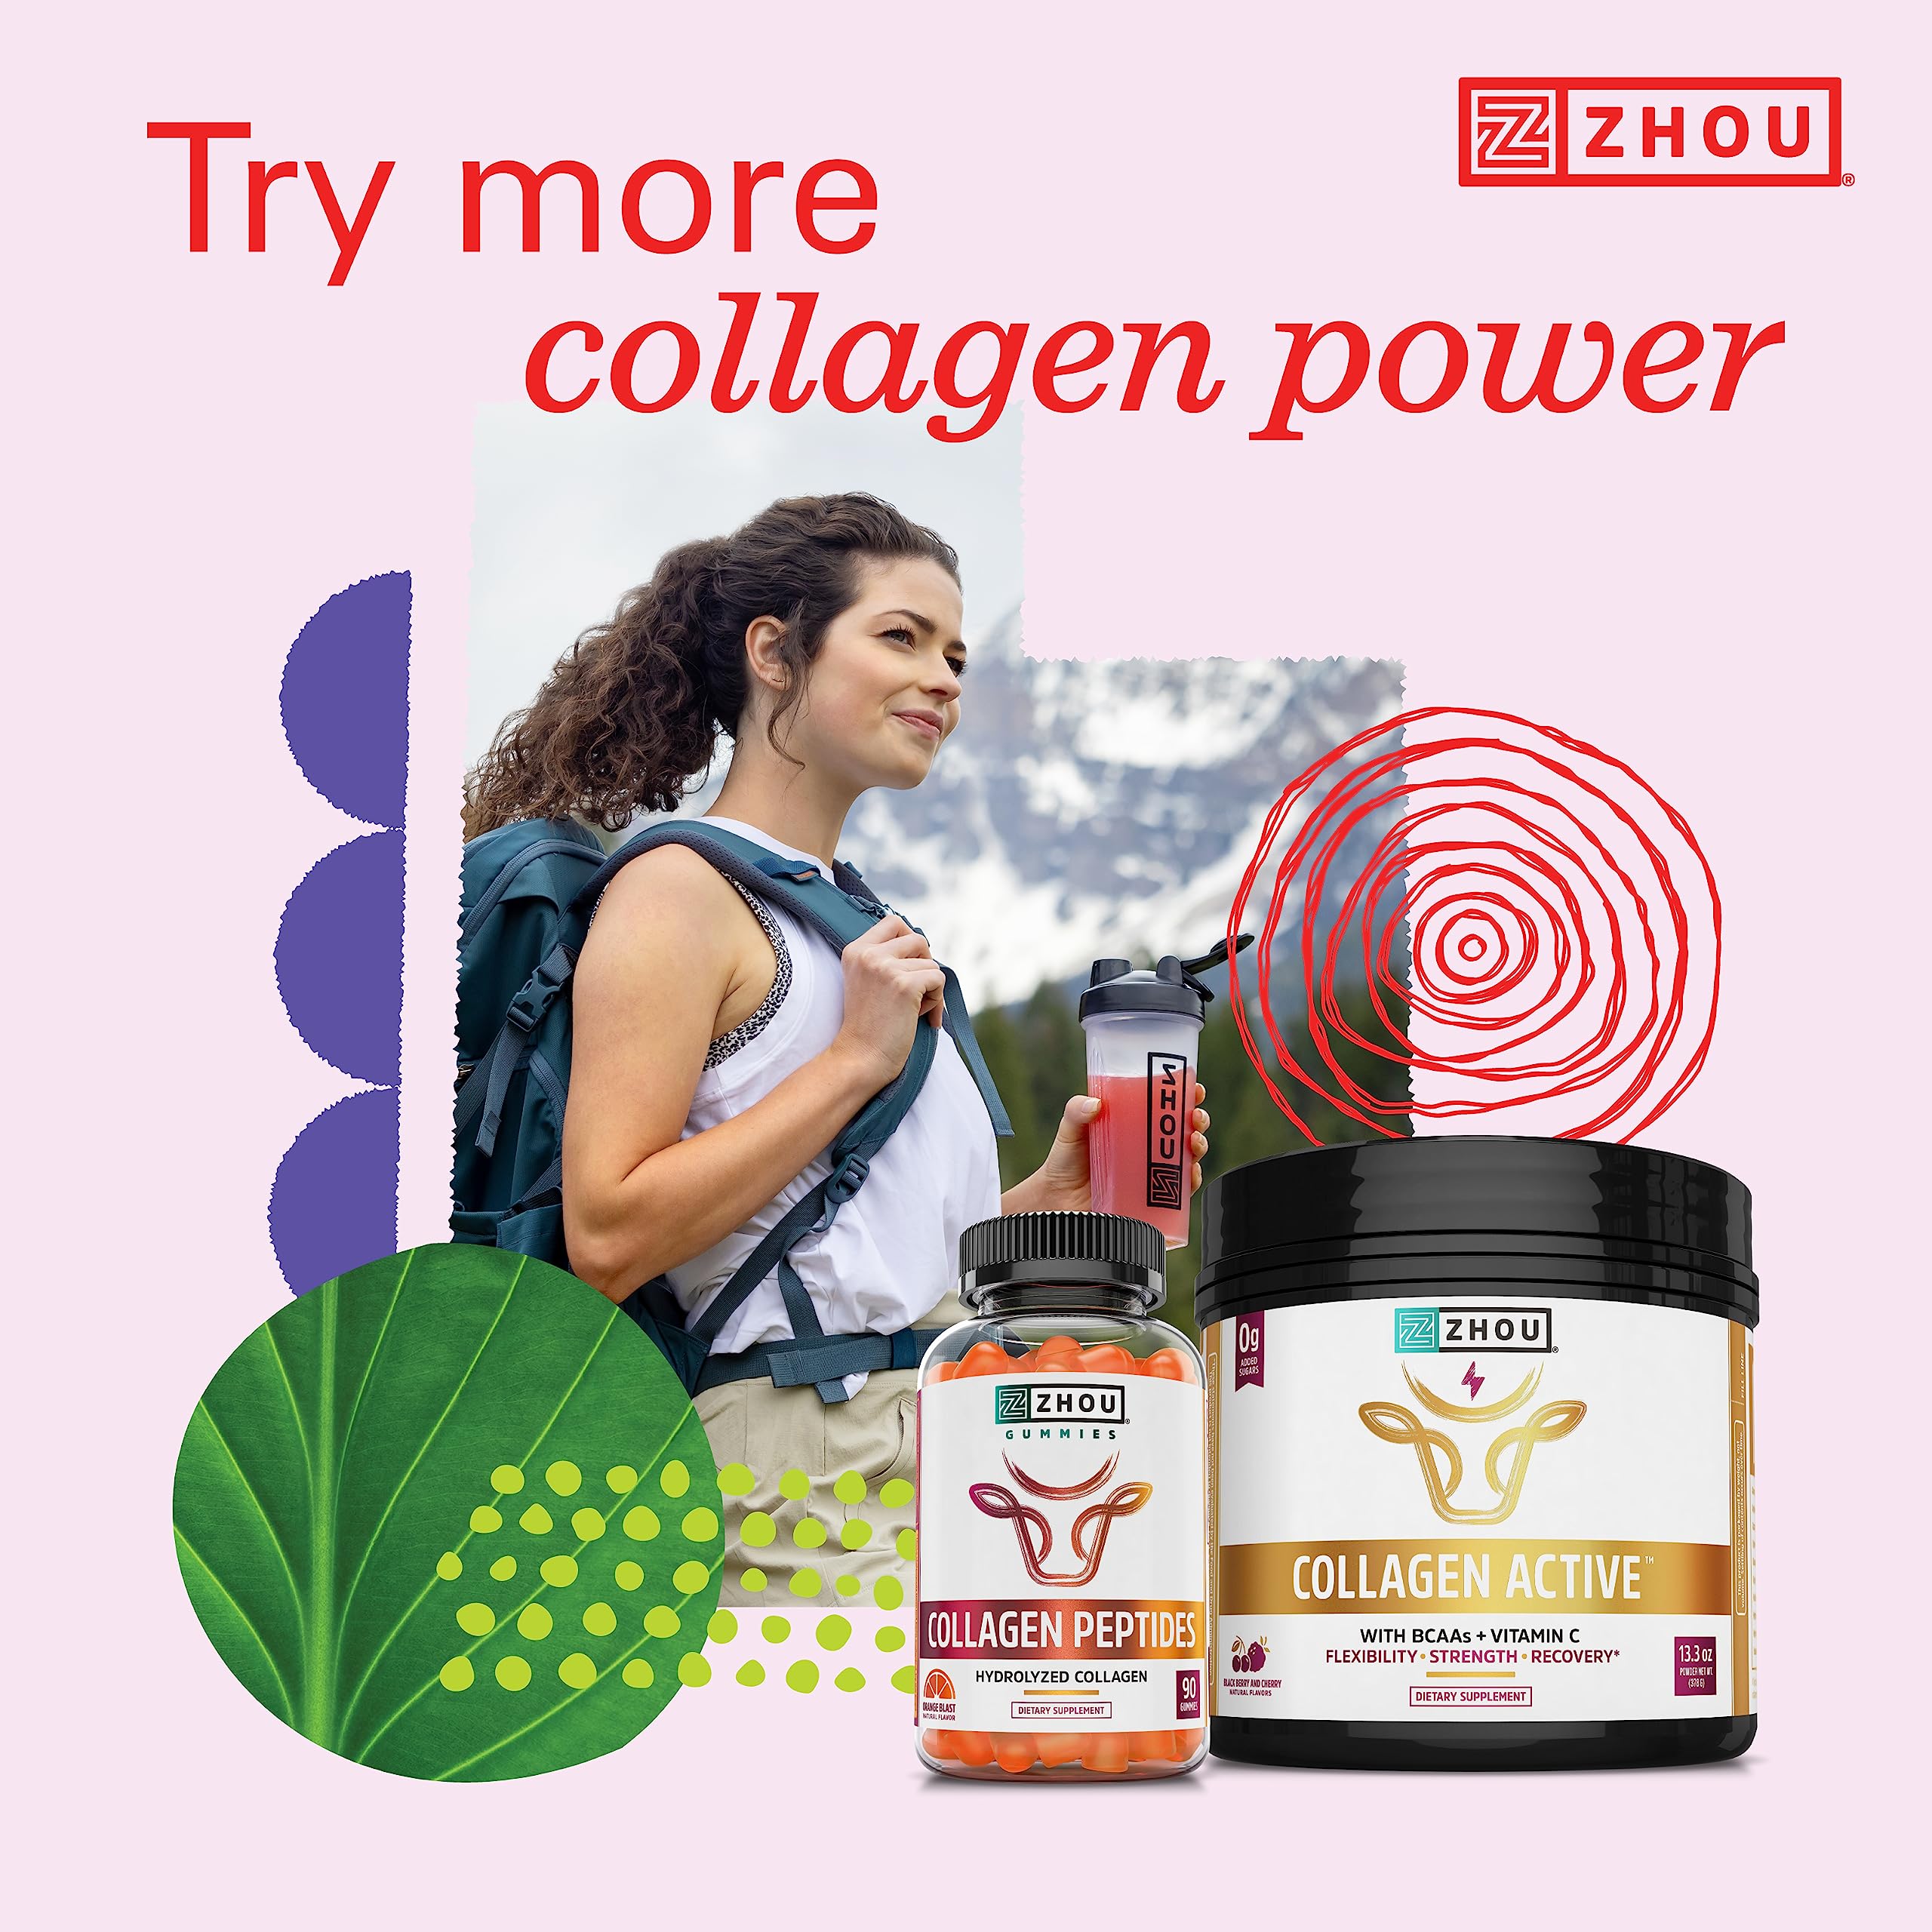 Zhou Collagen Peptides Hydrolyzed Protein Powder – Grass Fed, Pasture Raised, Unflavored, Hormone-Free, Non-GMO,18 Ounce